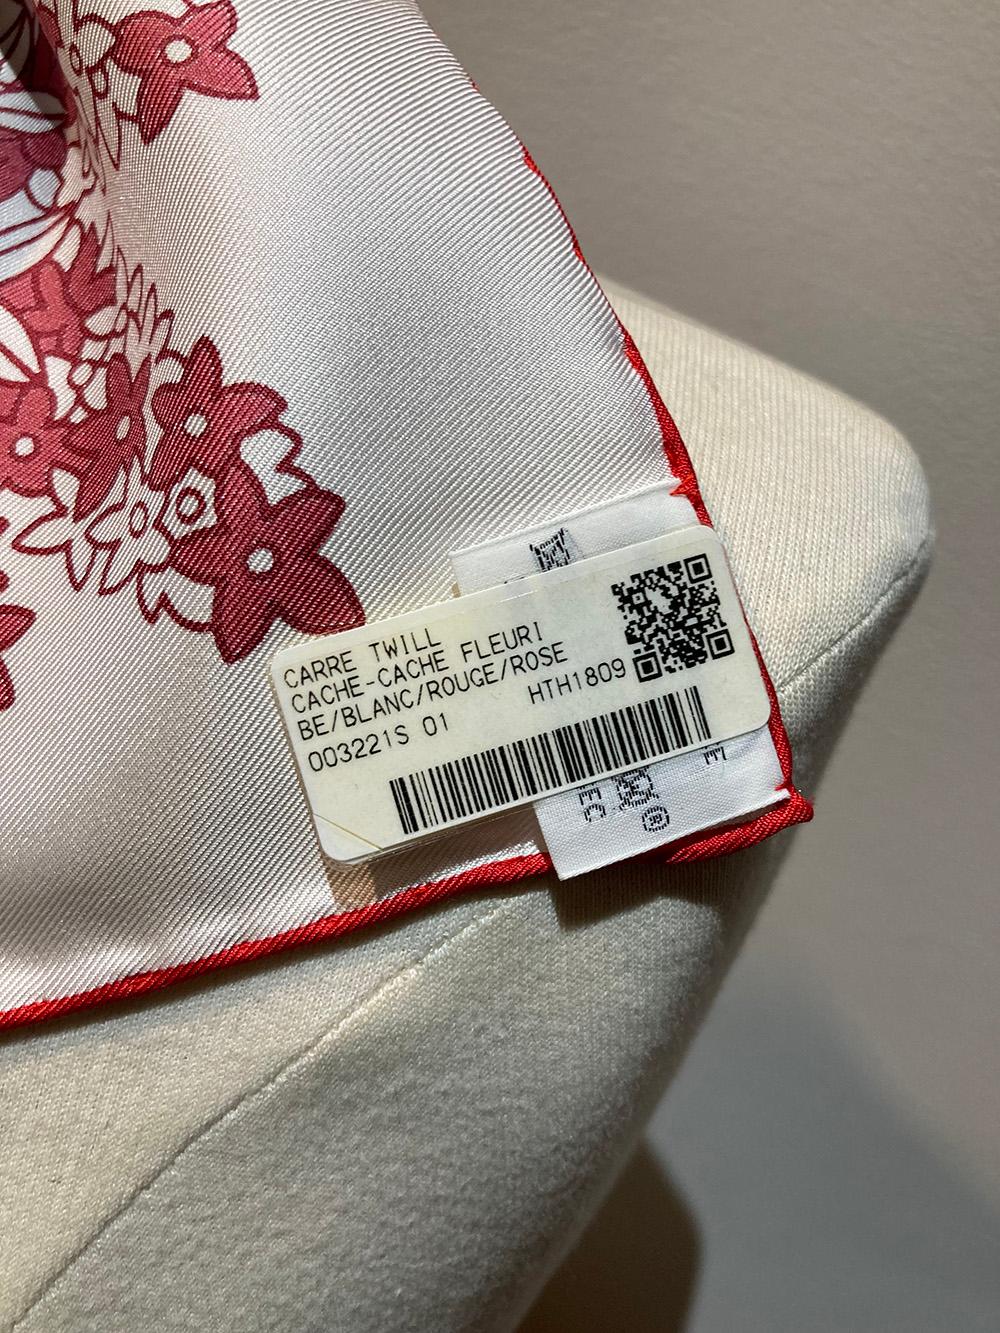 NWT Hermes Cache Cache Fleur Scarf 90 Blanc Rouge Rose For Sale 3